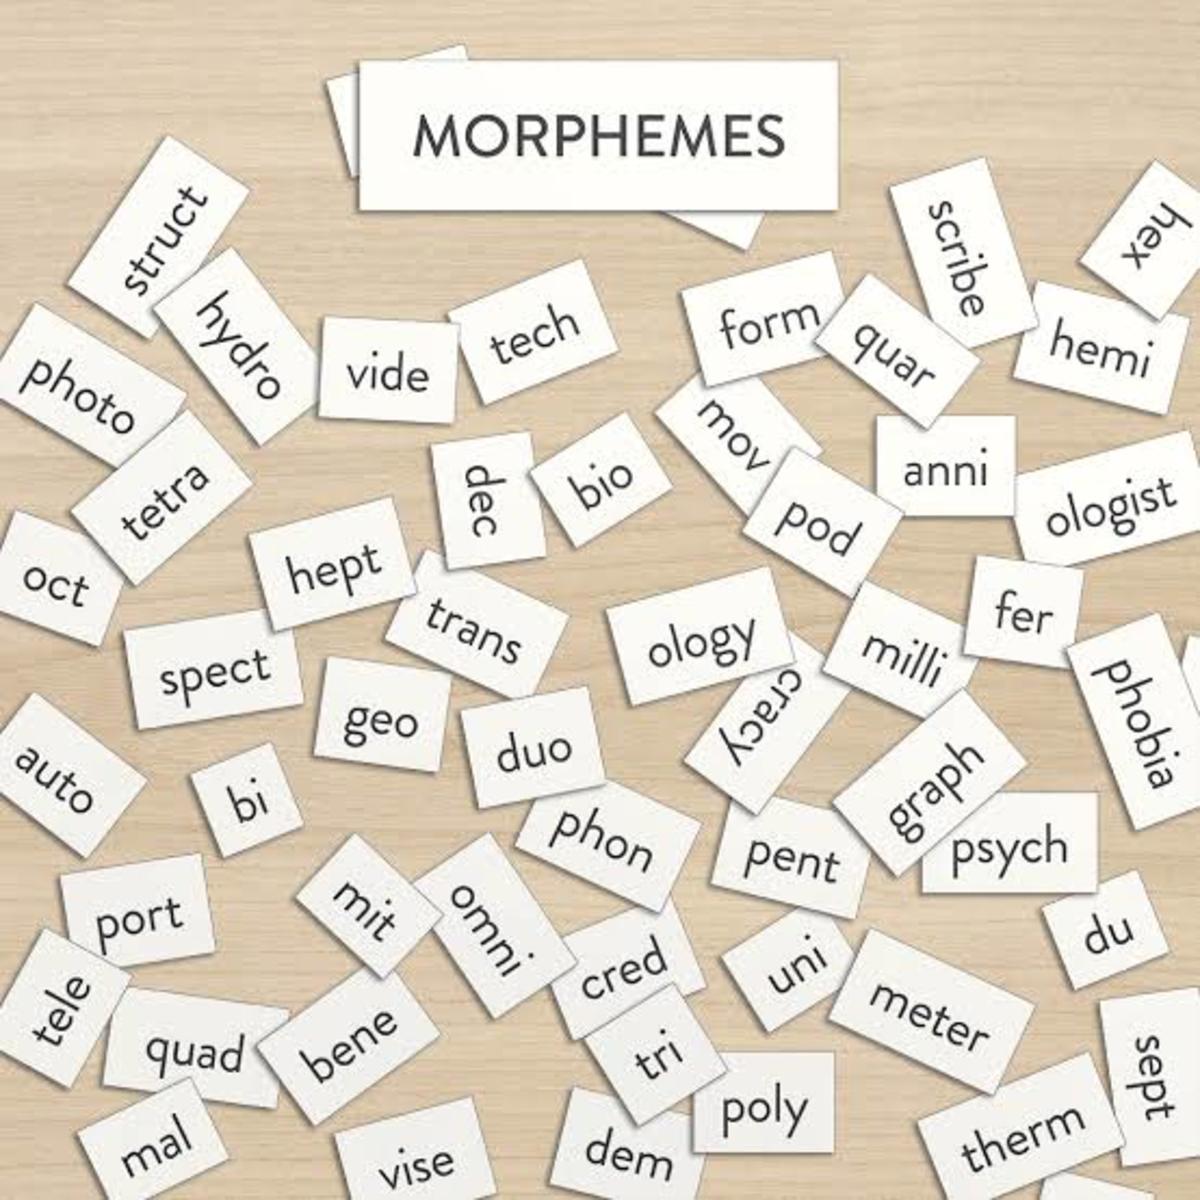 Types and Meaning of Morphemes